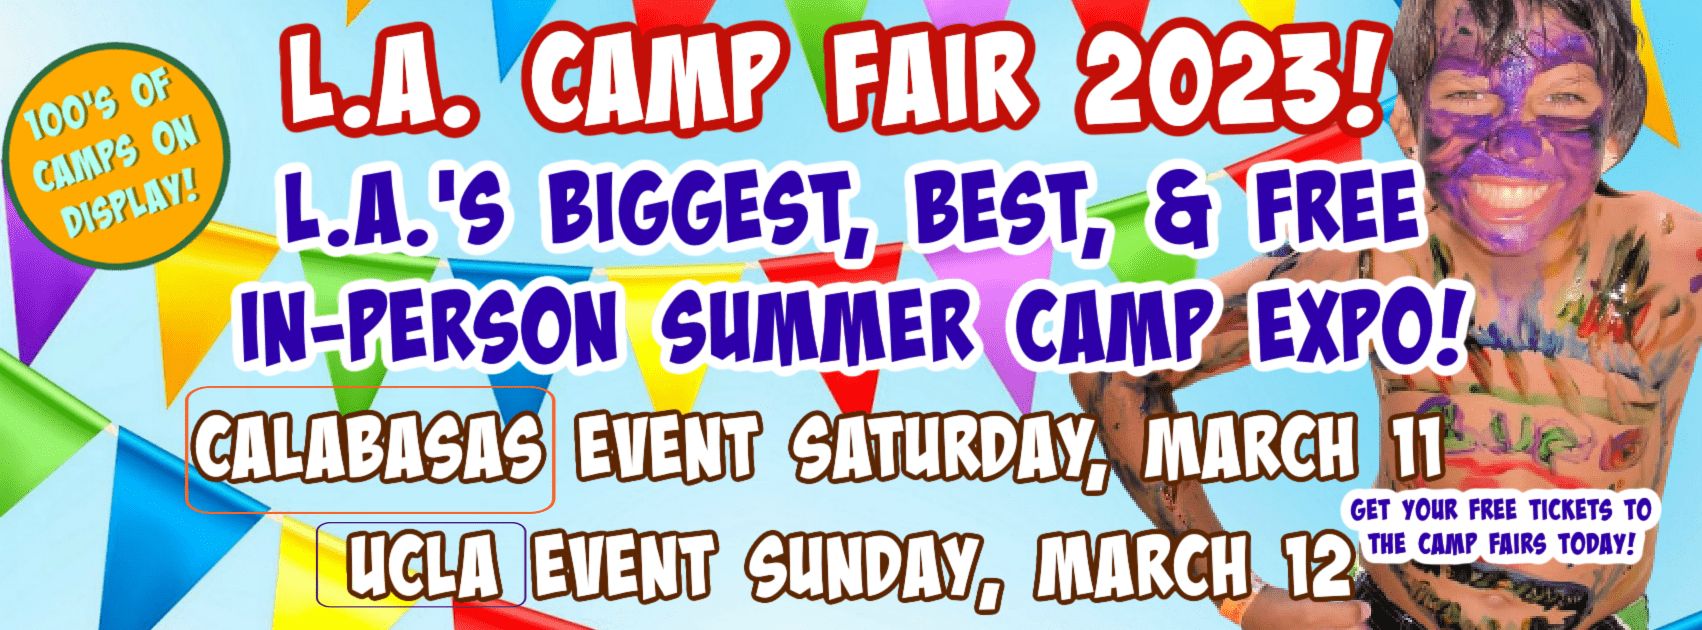 Large colorful banner promoting L.A. Camp Fair 2023 and its two in-person summer camp expos at UCLA and Calabasas in March 2023.